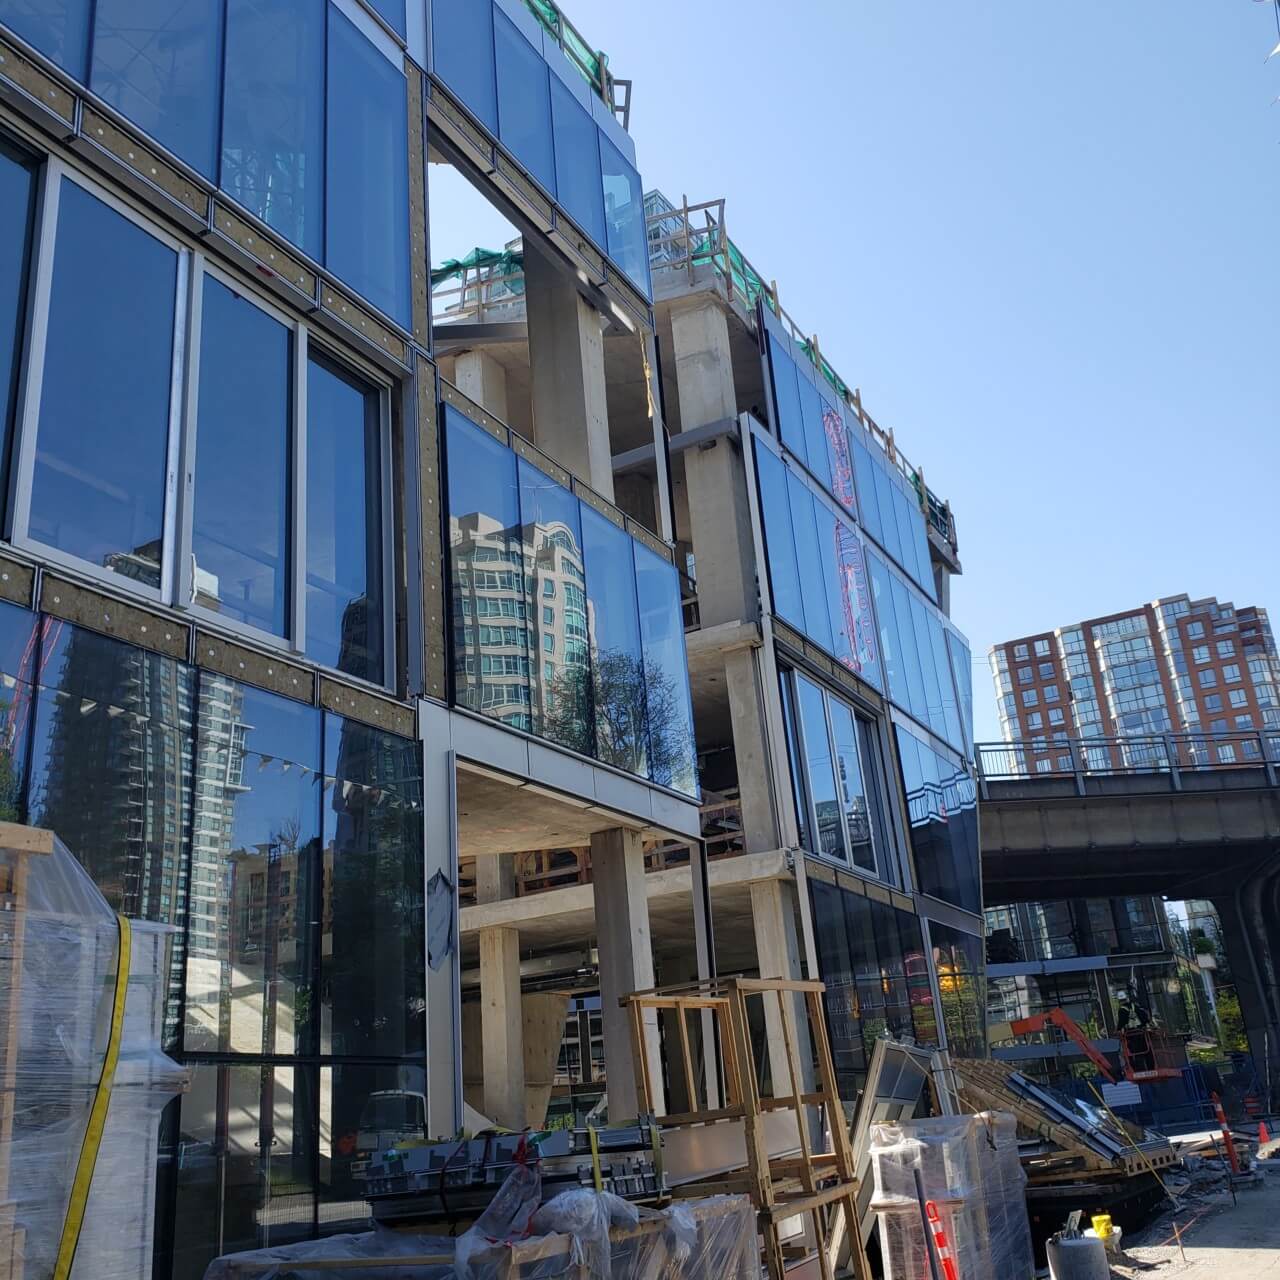 Construction of a glassy retail space